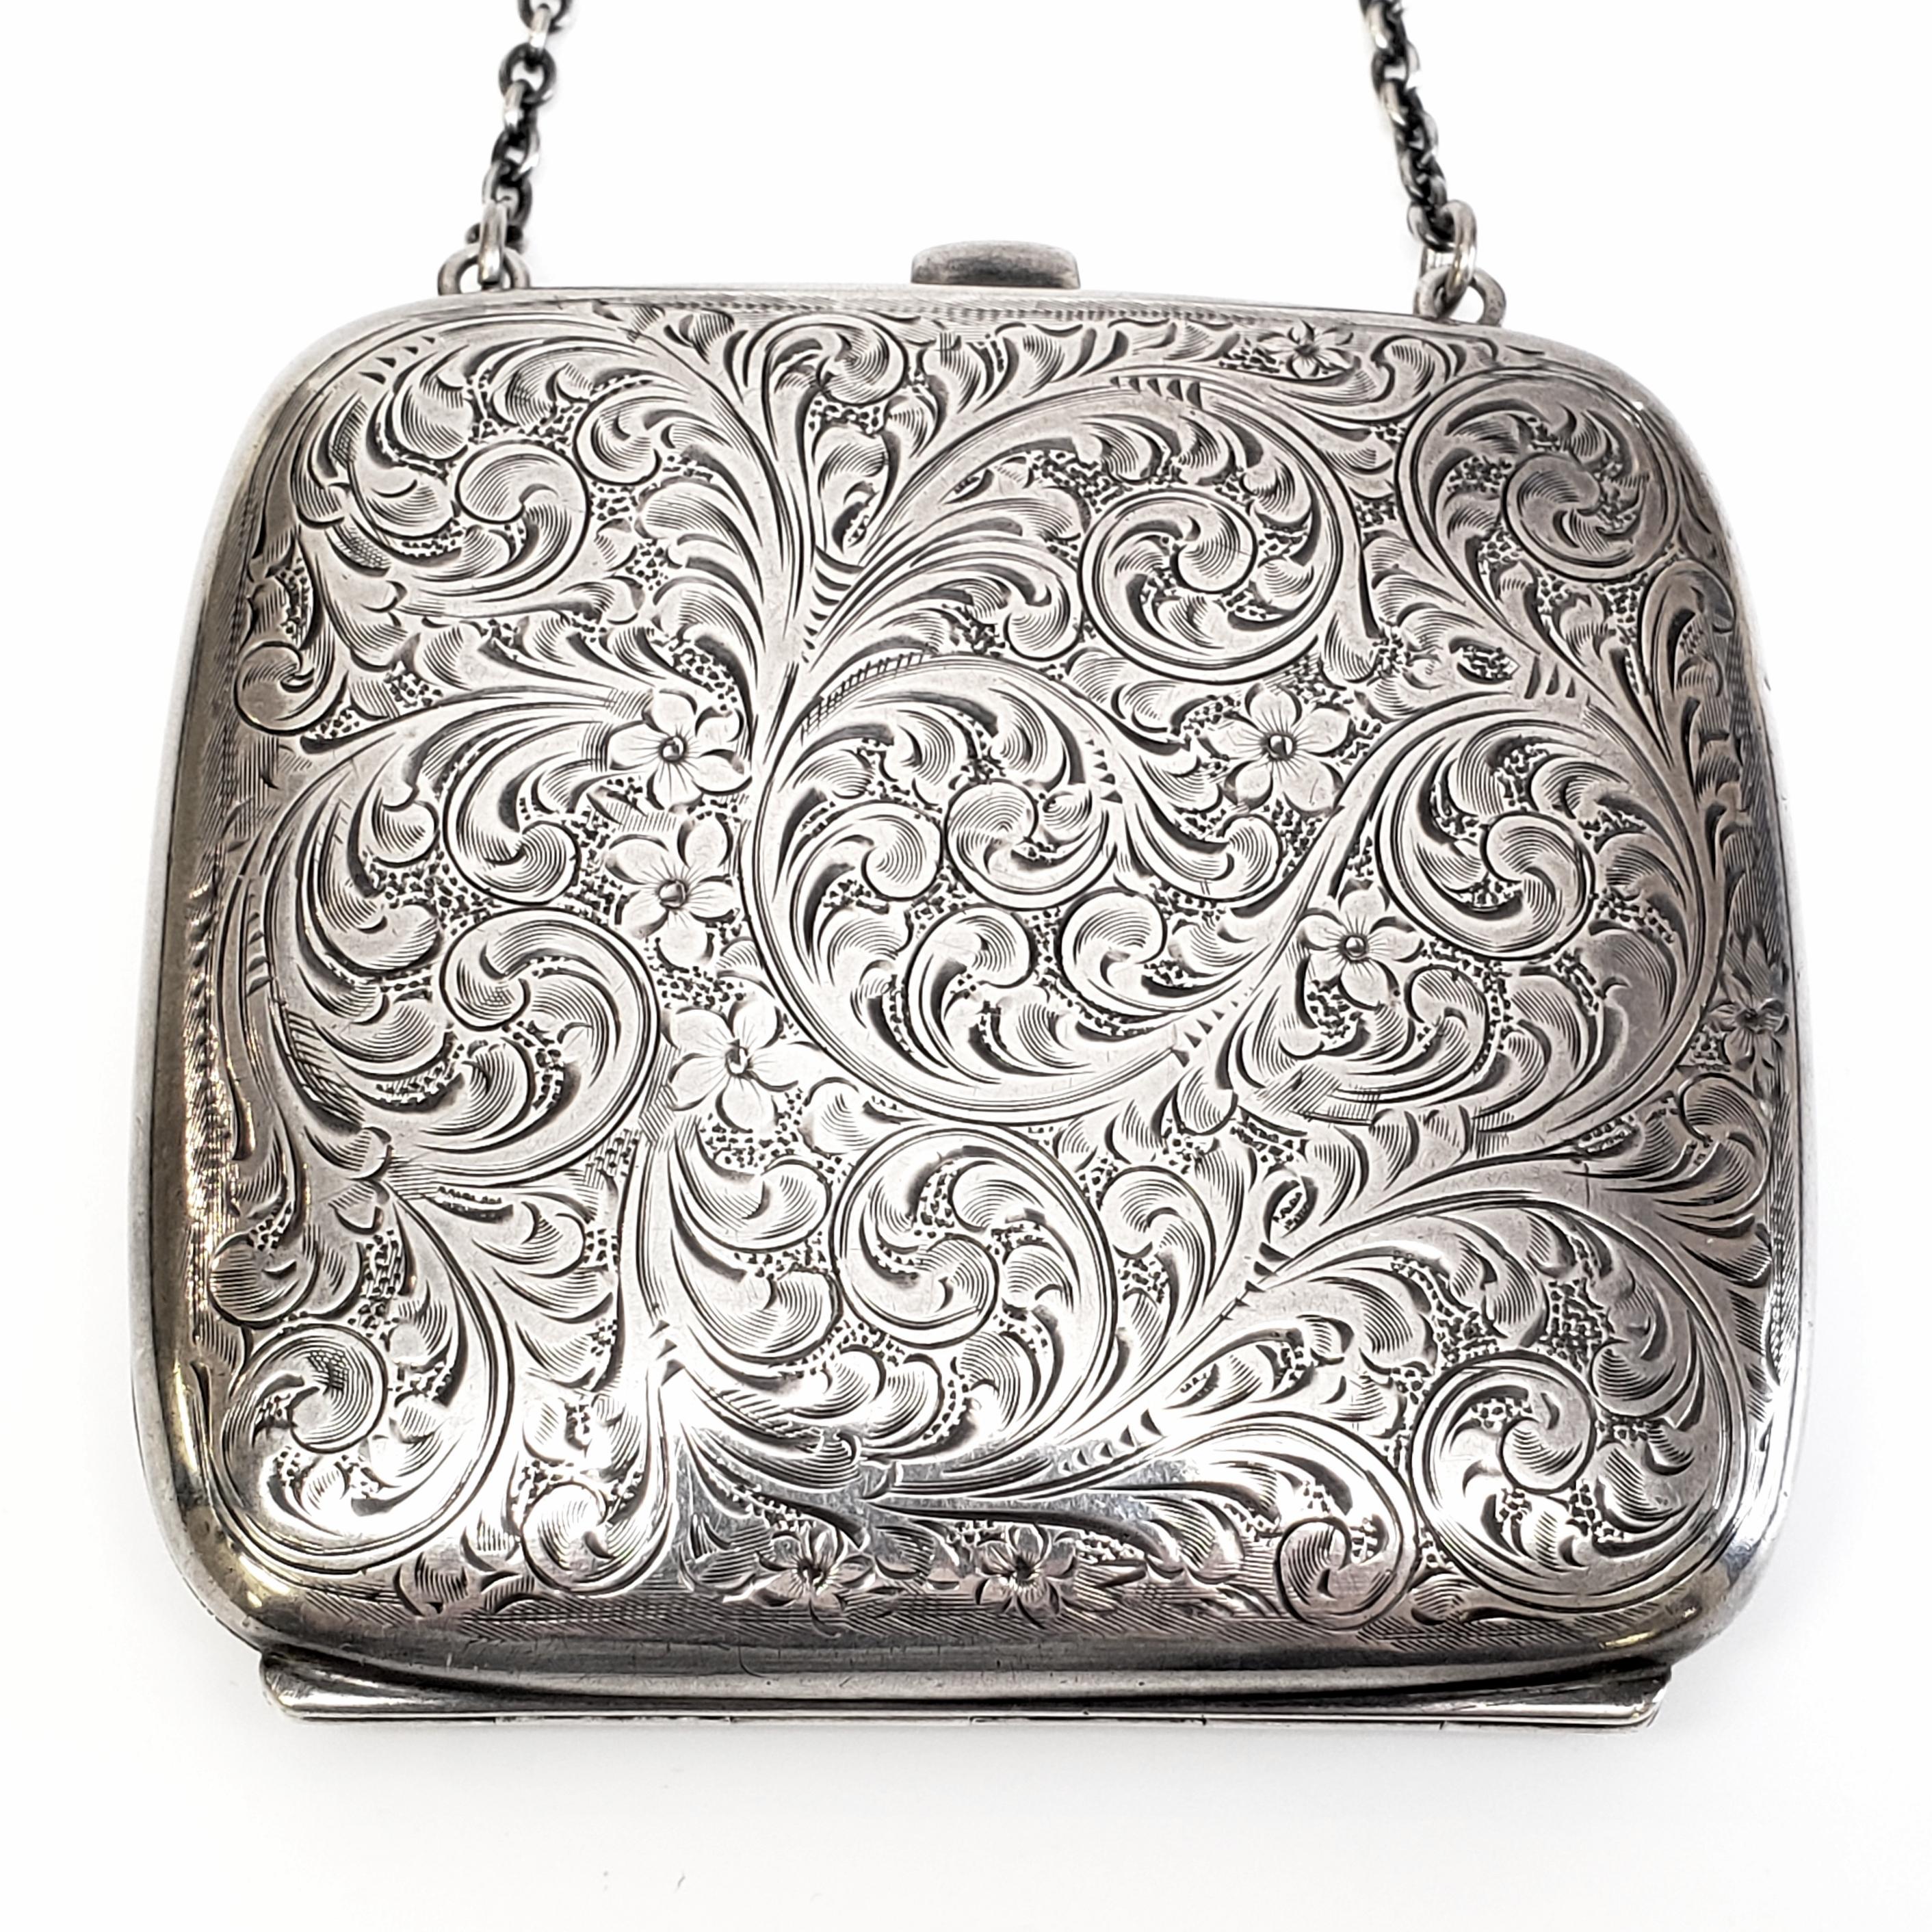 sterling silver coin purse